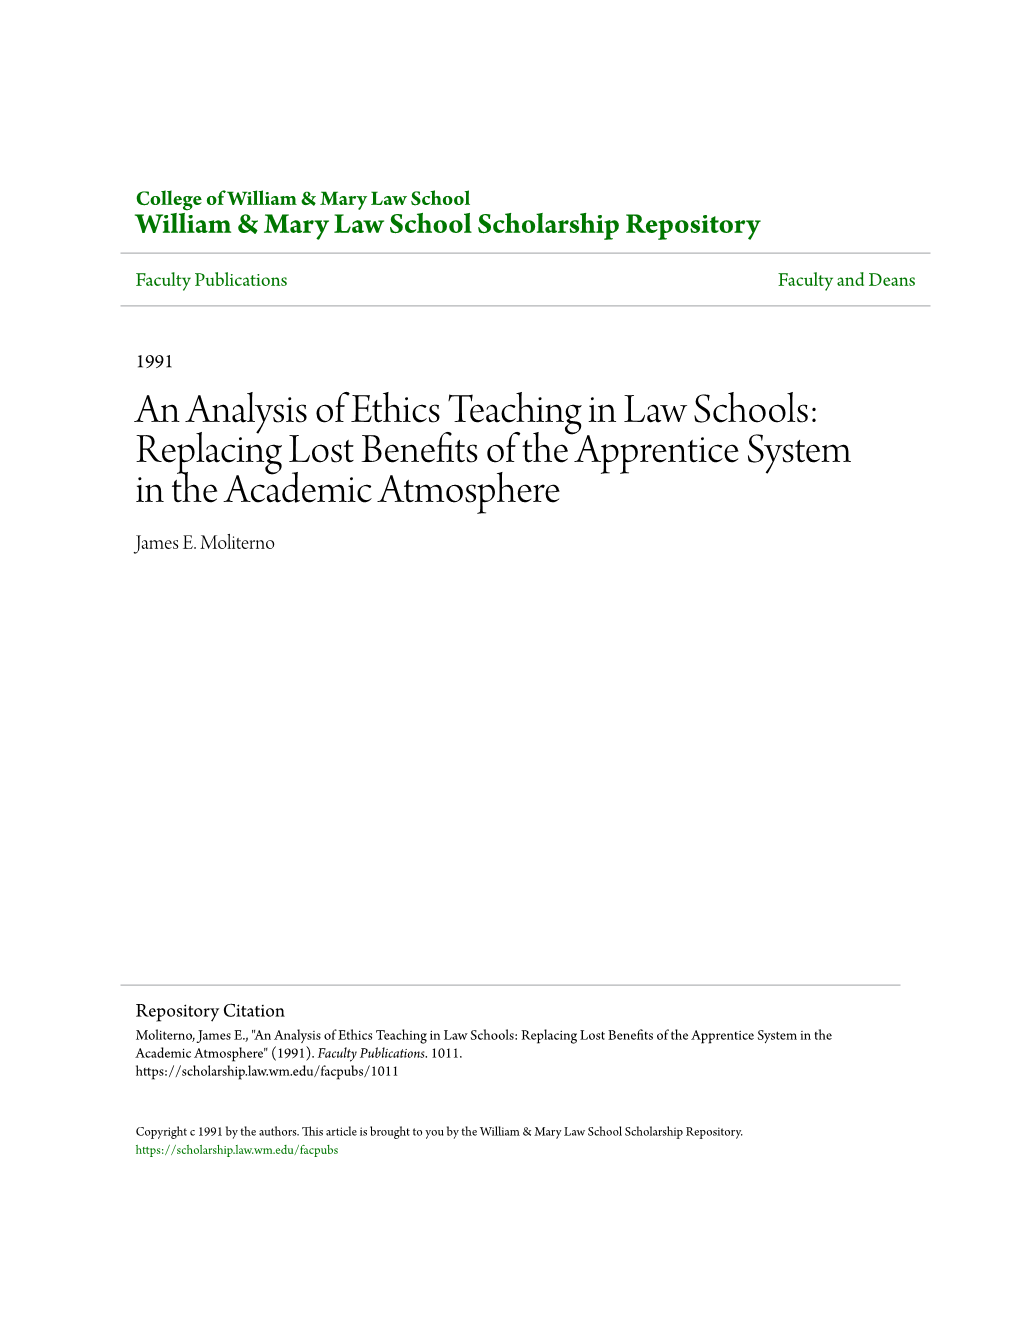 An Analysis of Ethics Teaching in Law Schools: Replacing Lost Benefits of the Apprentice System in the Academic Atmosphere James E